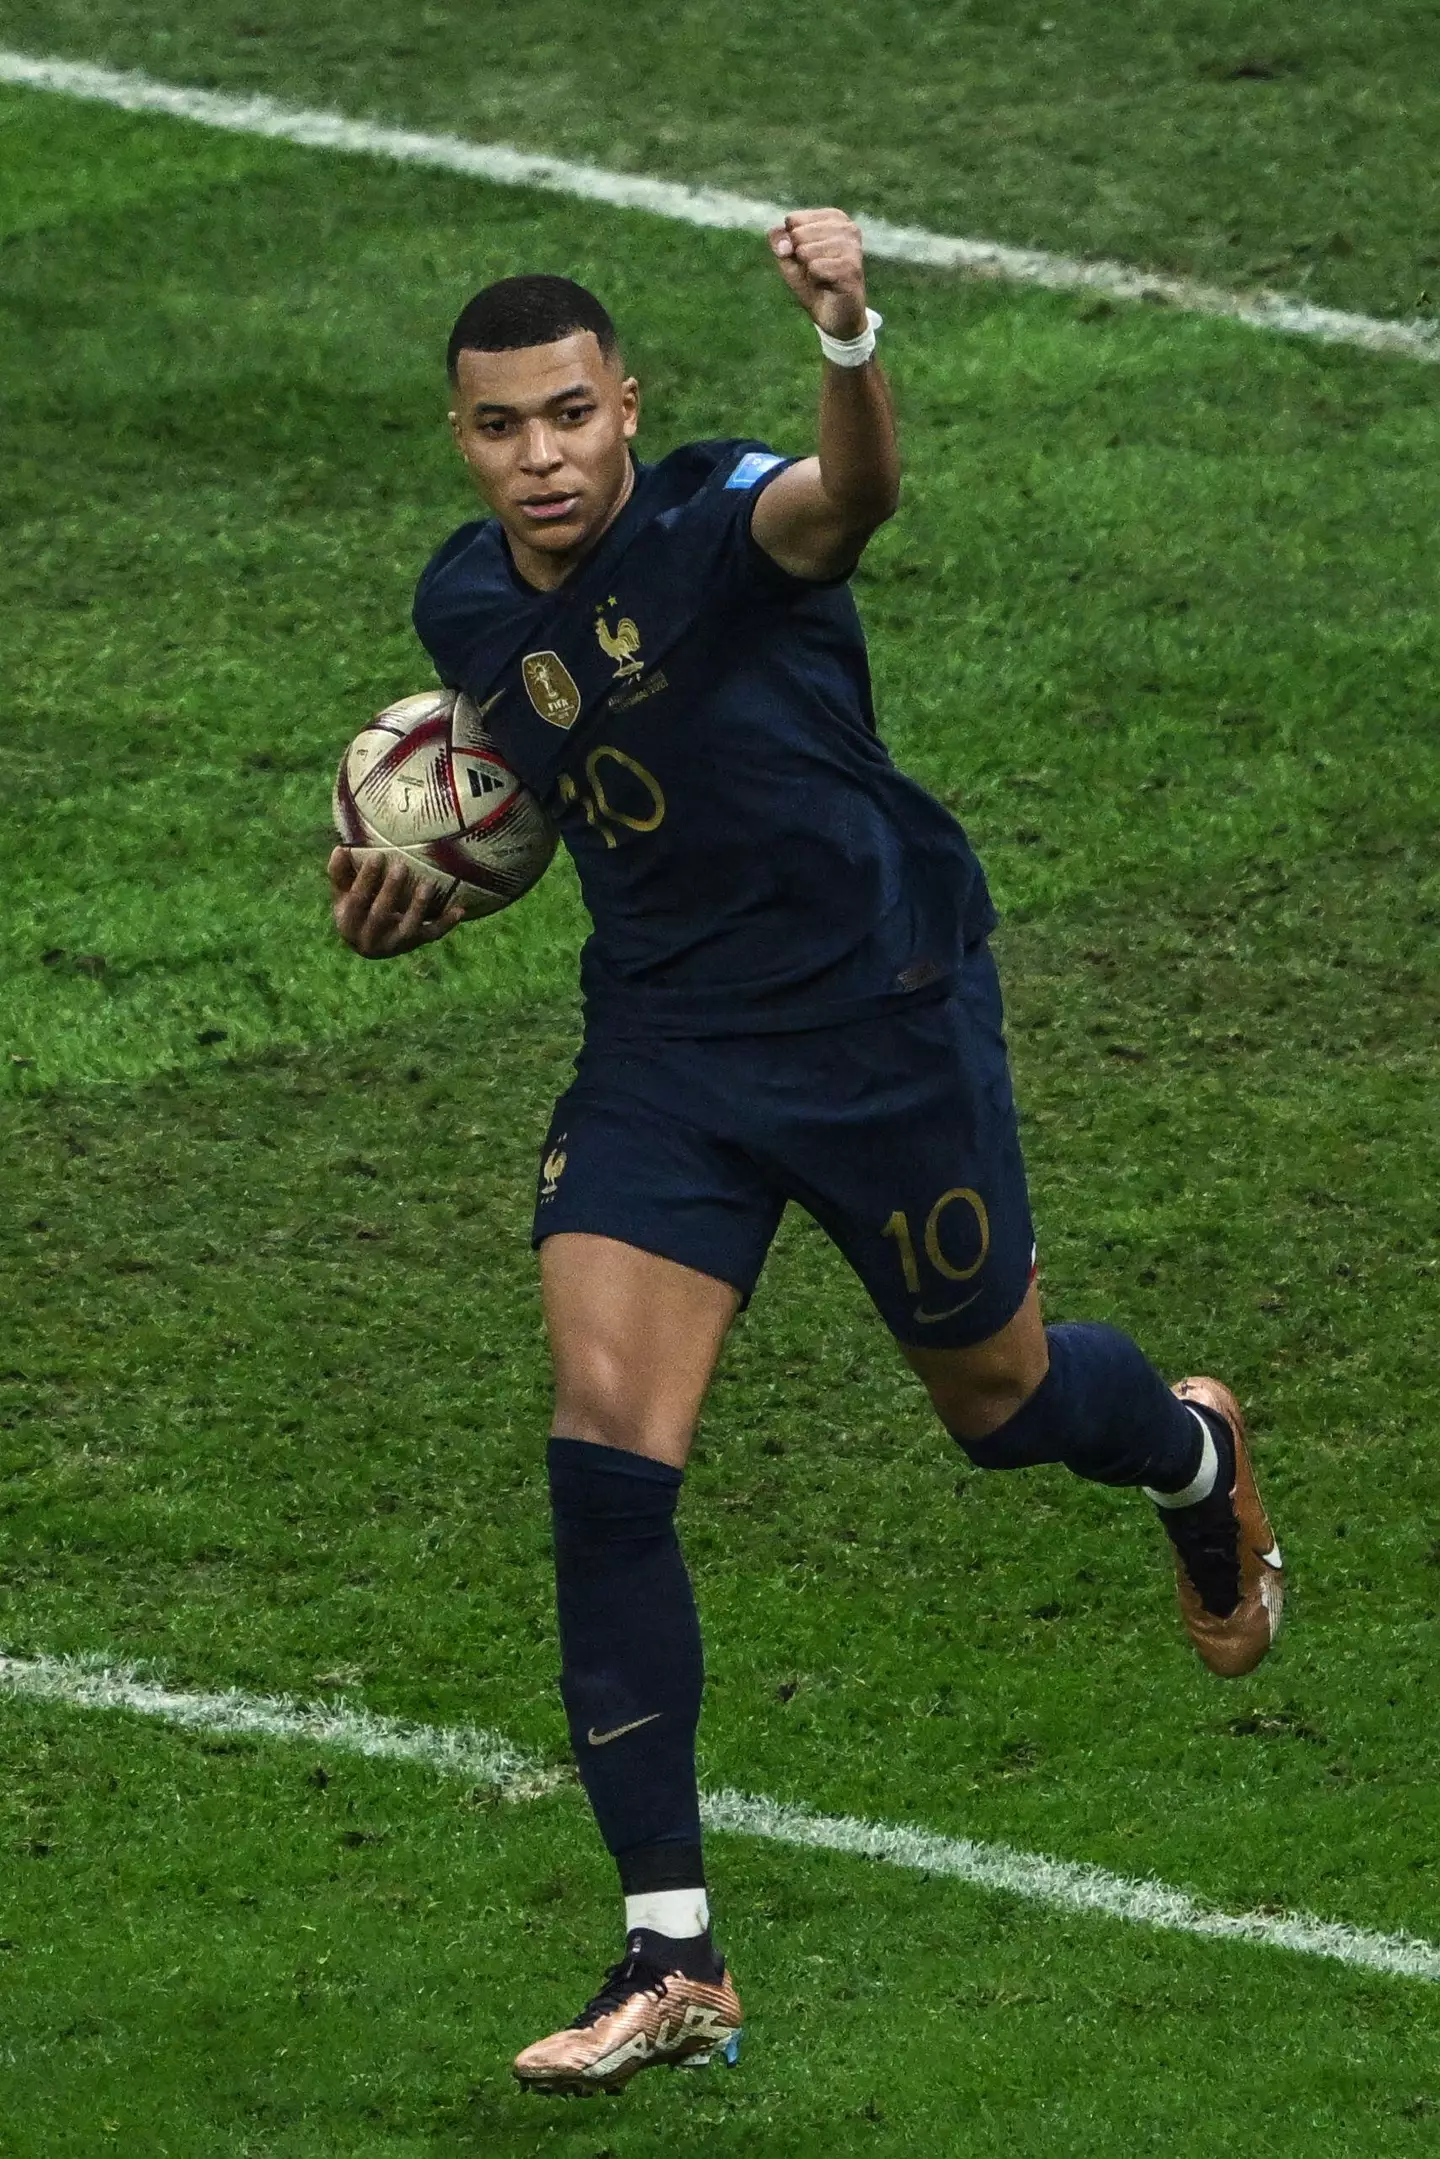 Kylian Mbappé managed to drag his team back into the match.